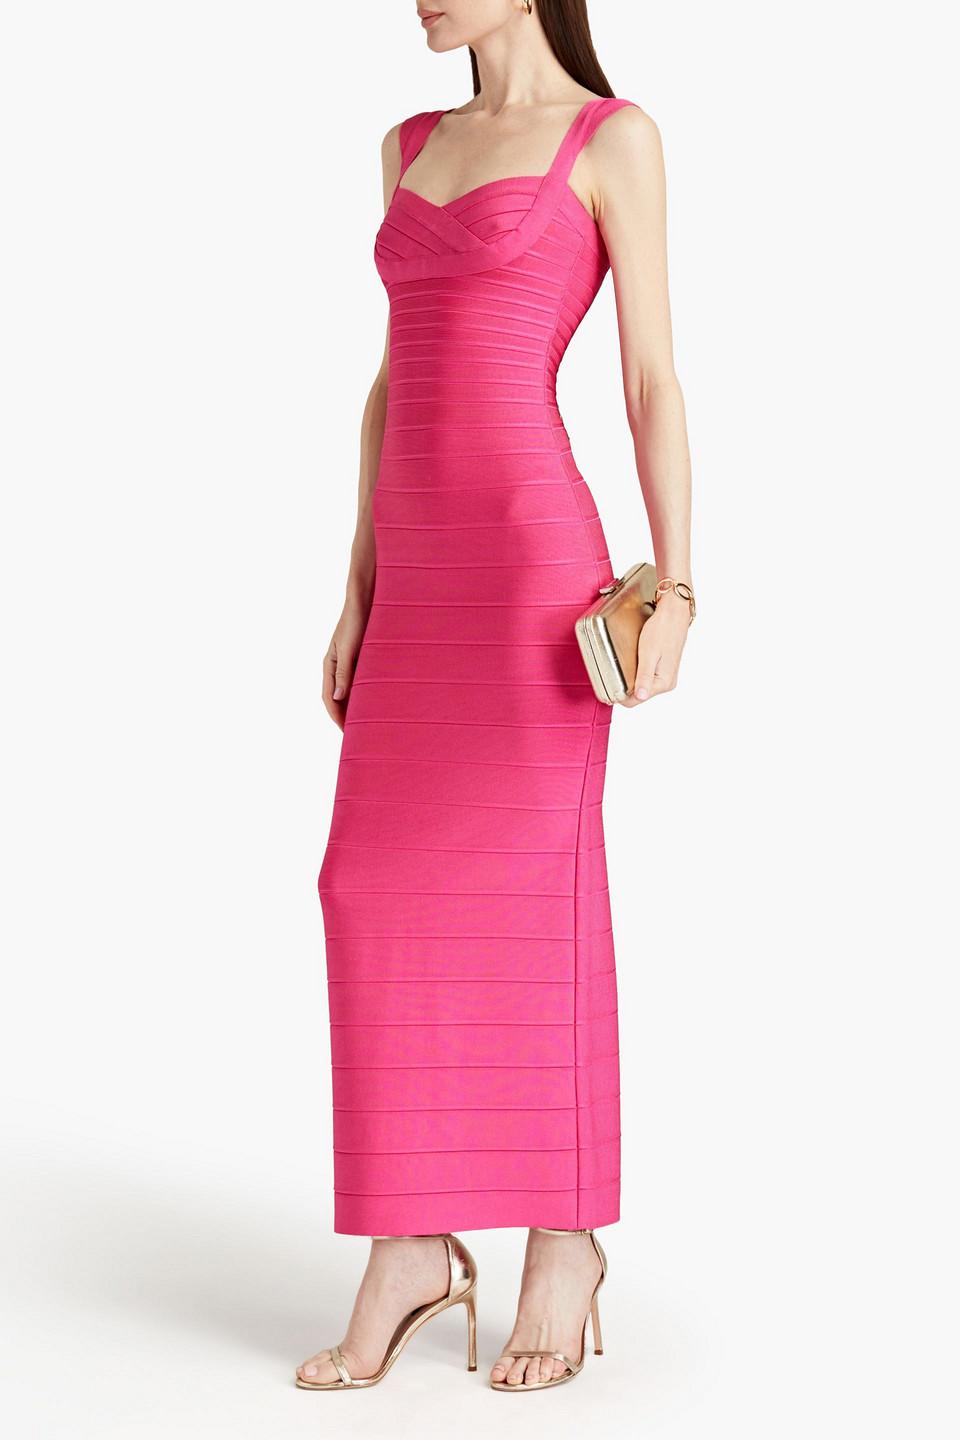 Hervé Léger Bandage Gown in Pink